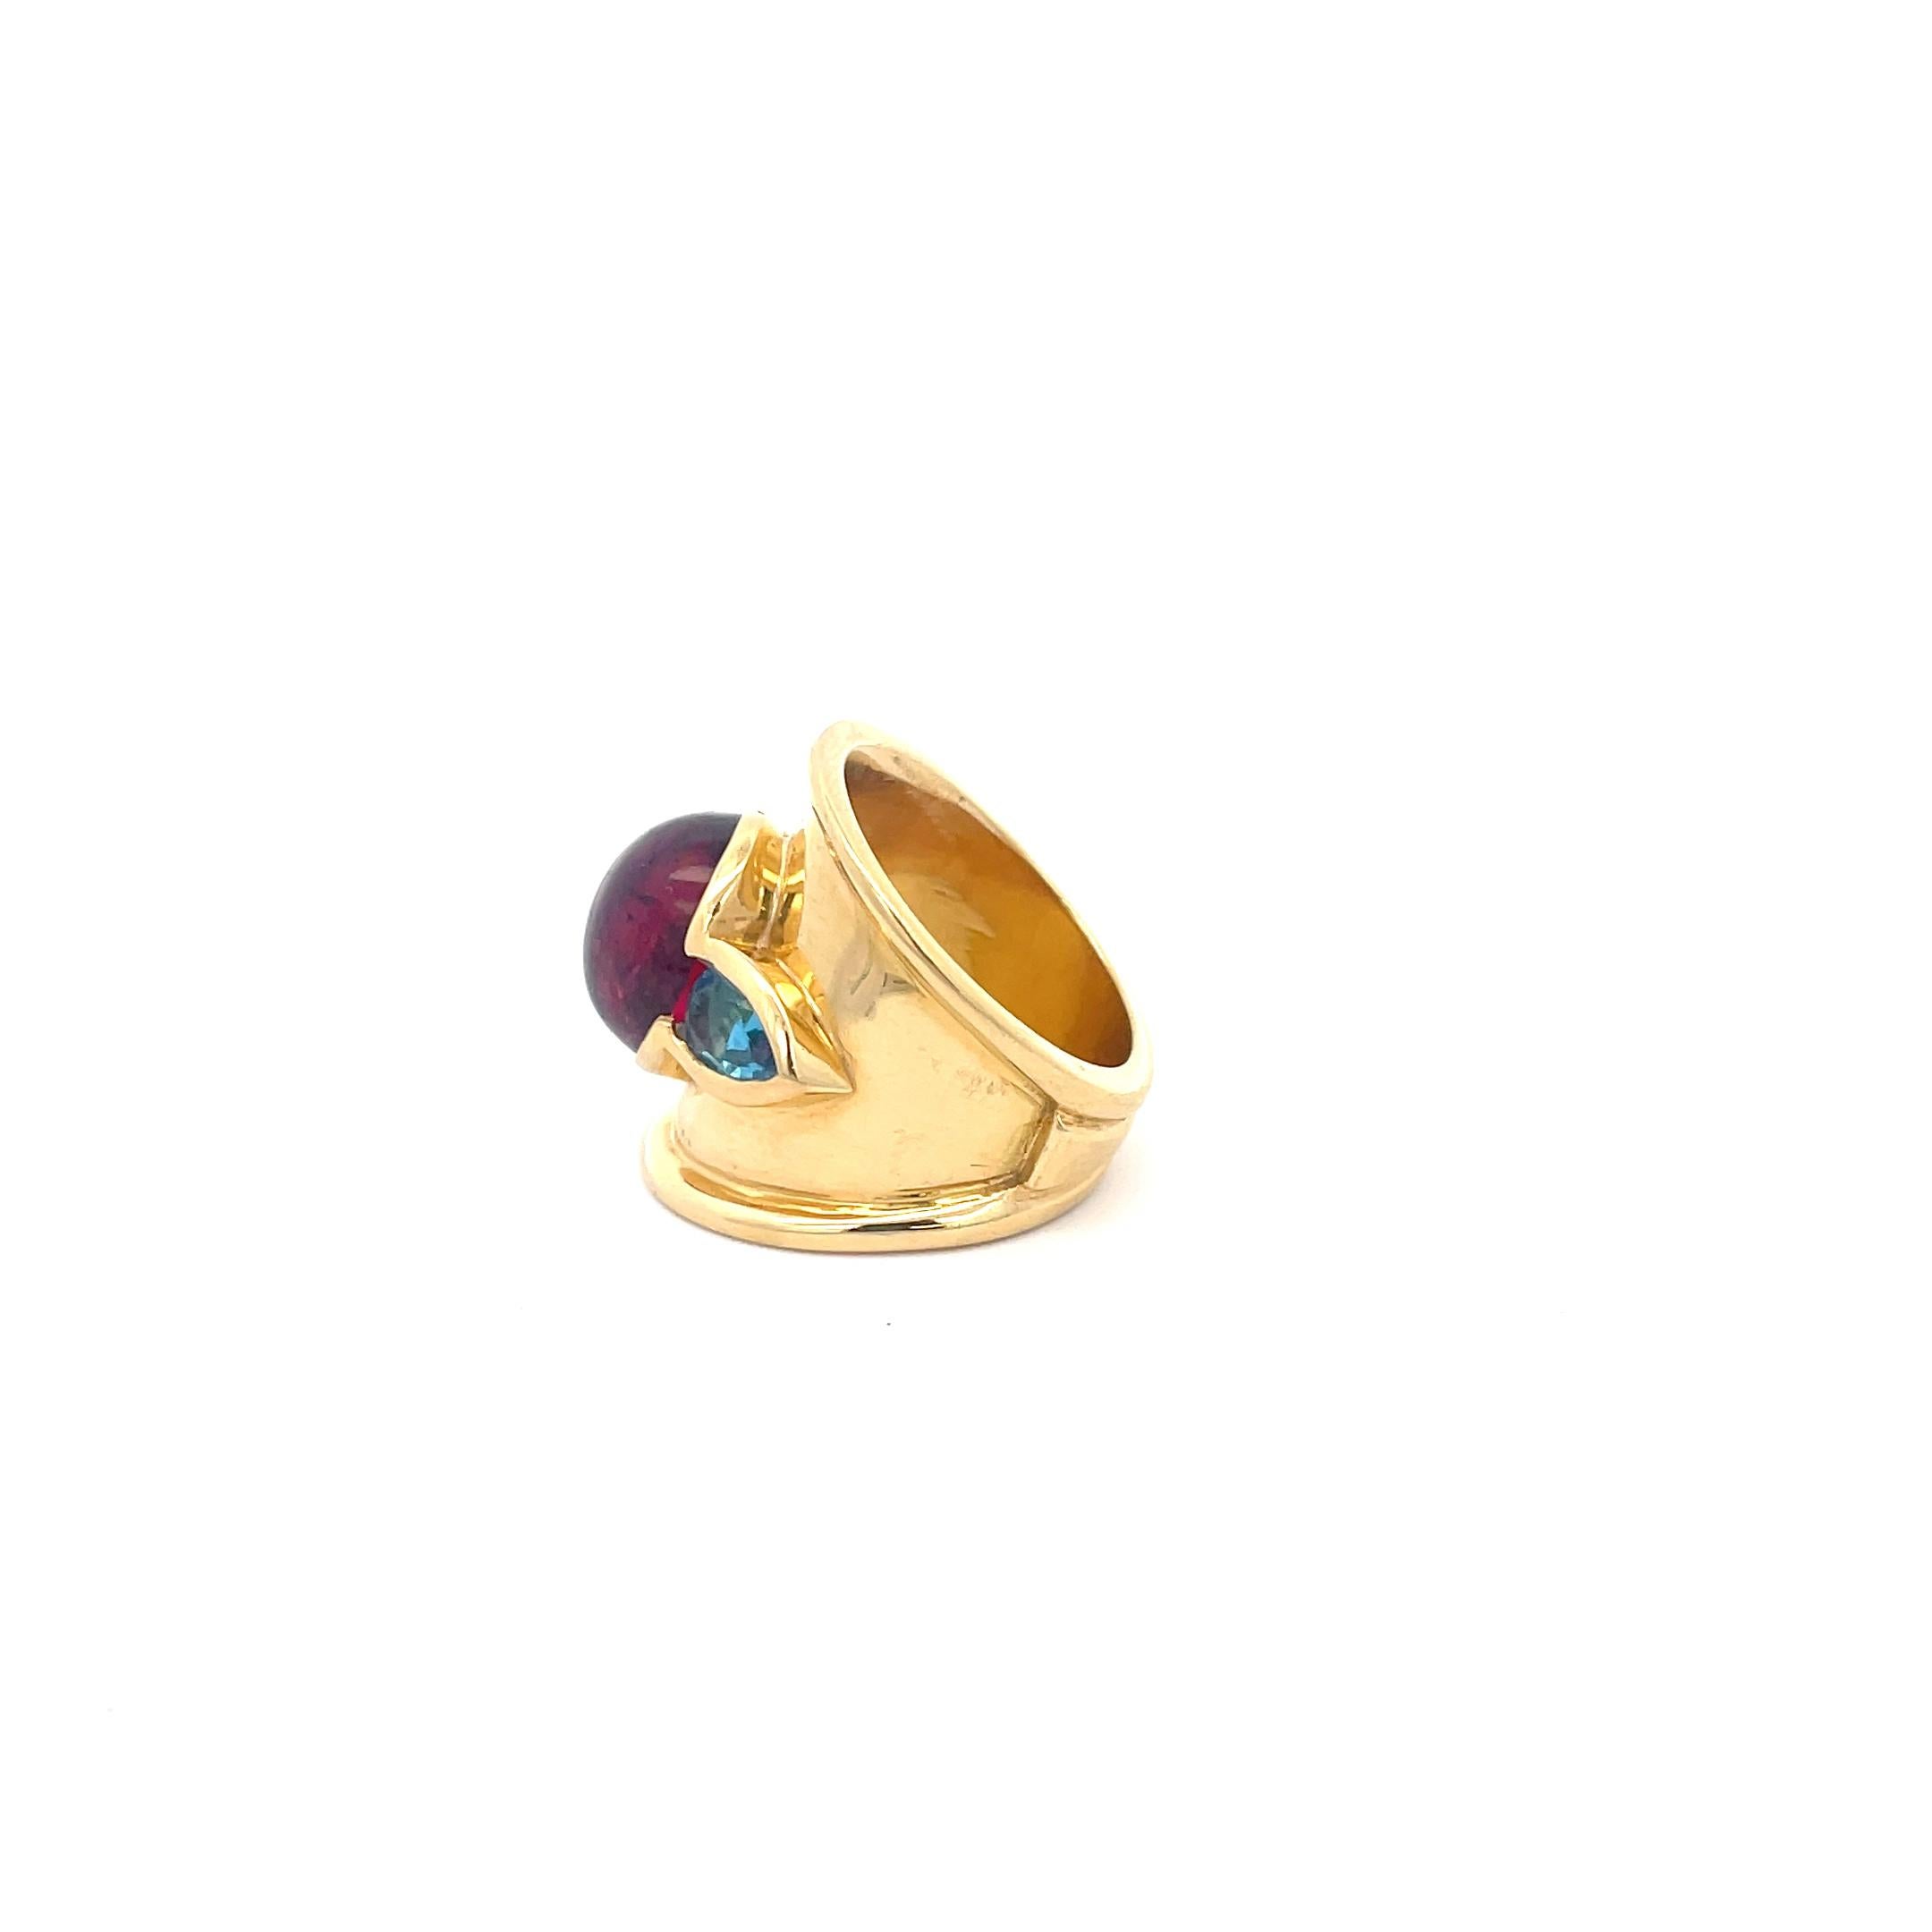 Rubellite and Blue Topaz Ring in 18K Yellow Gold. The ring features a cabochon rubellite (apprx 12.85mm x 10.50mm) and two pear shape blue topazes (apprx 6.90mm x 4.90mm). The ring is 22.75mm at widest point. Ring size 6.25. 
15.6 Grams